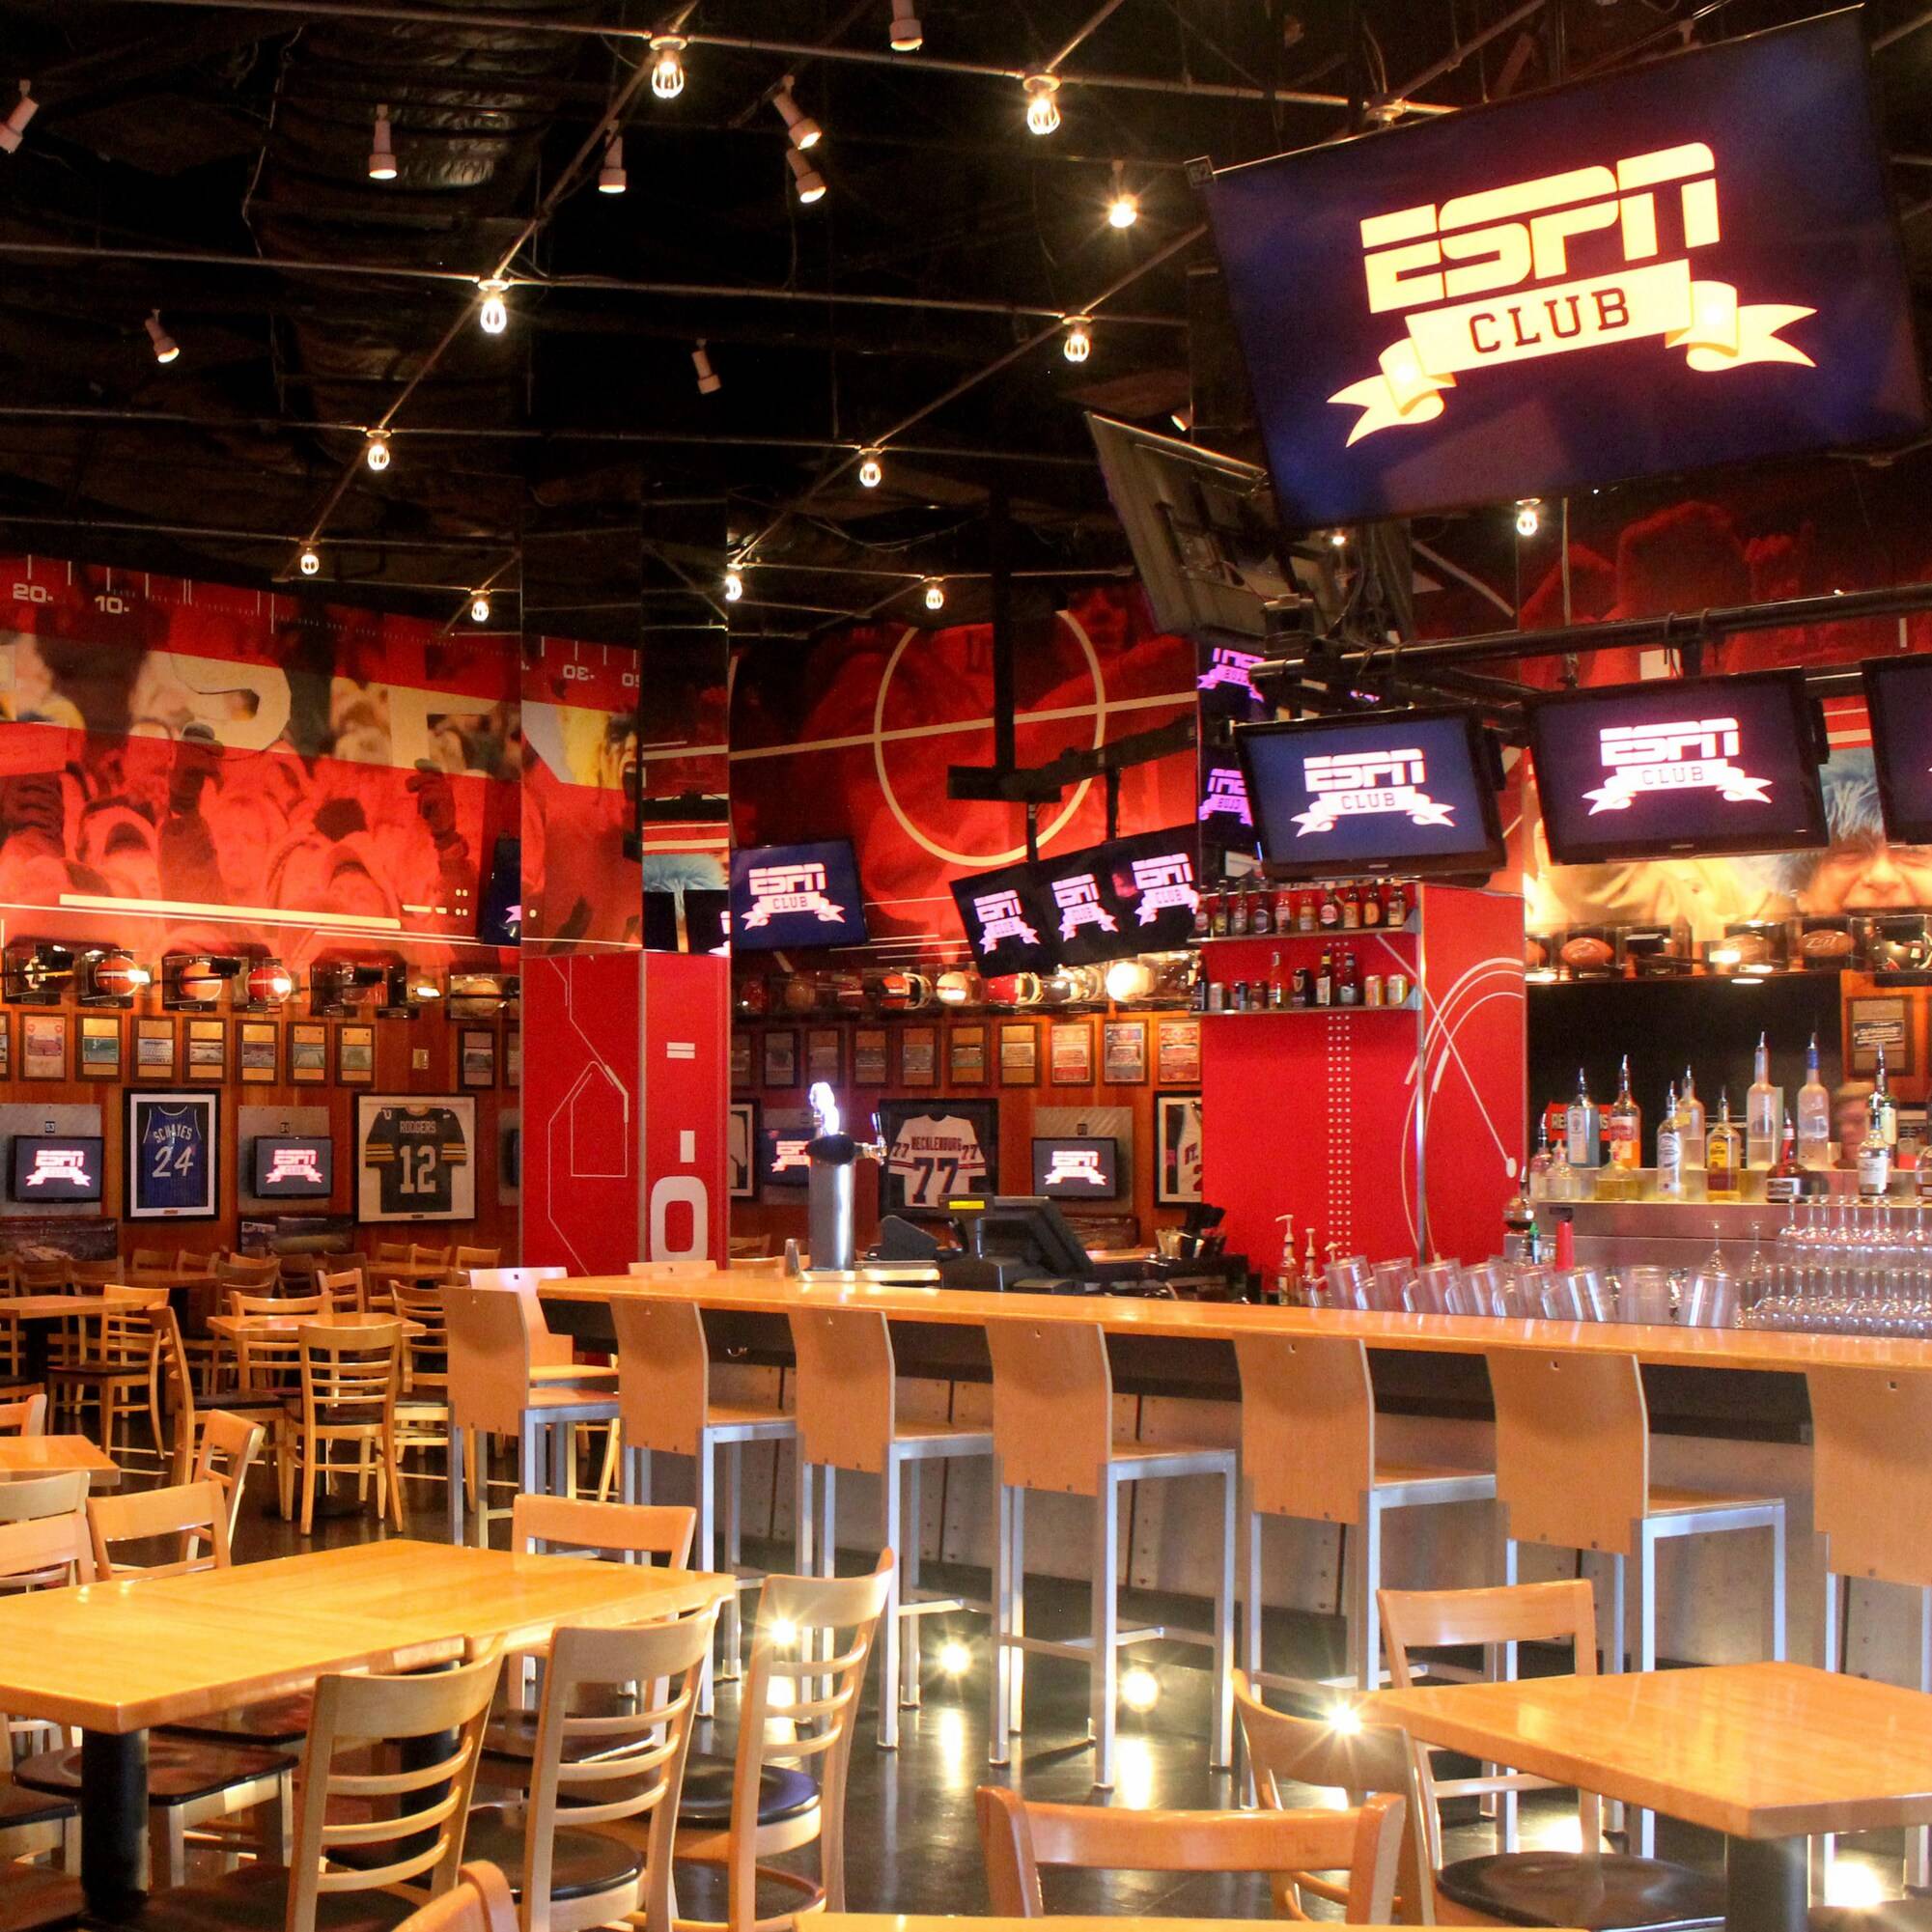 ESPN Club overview